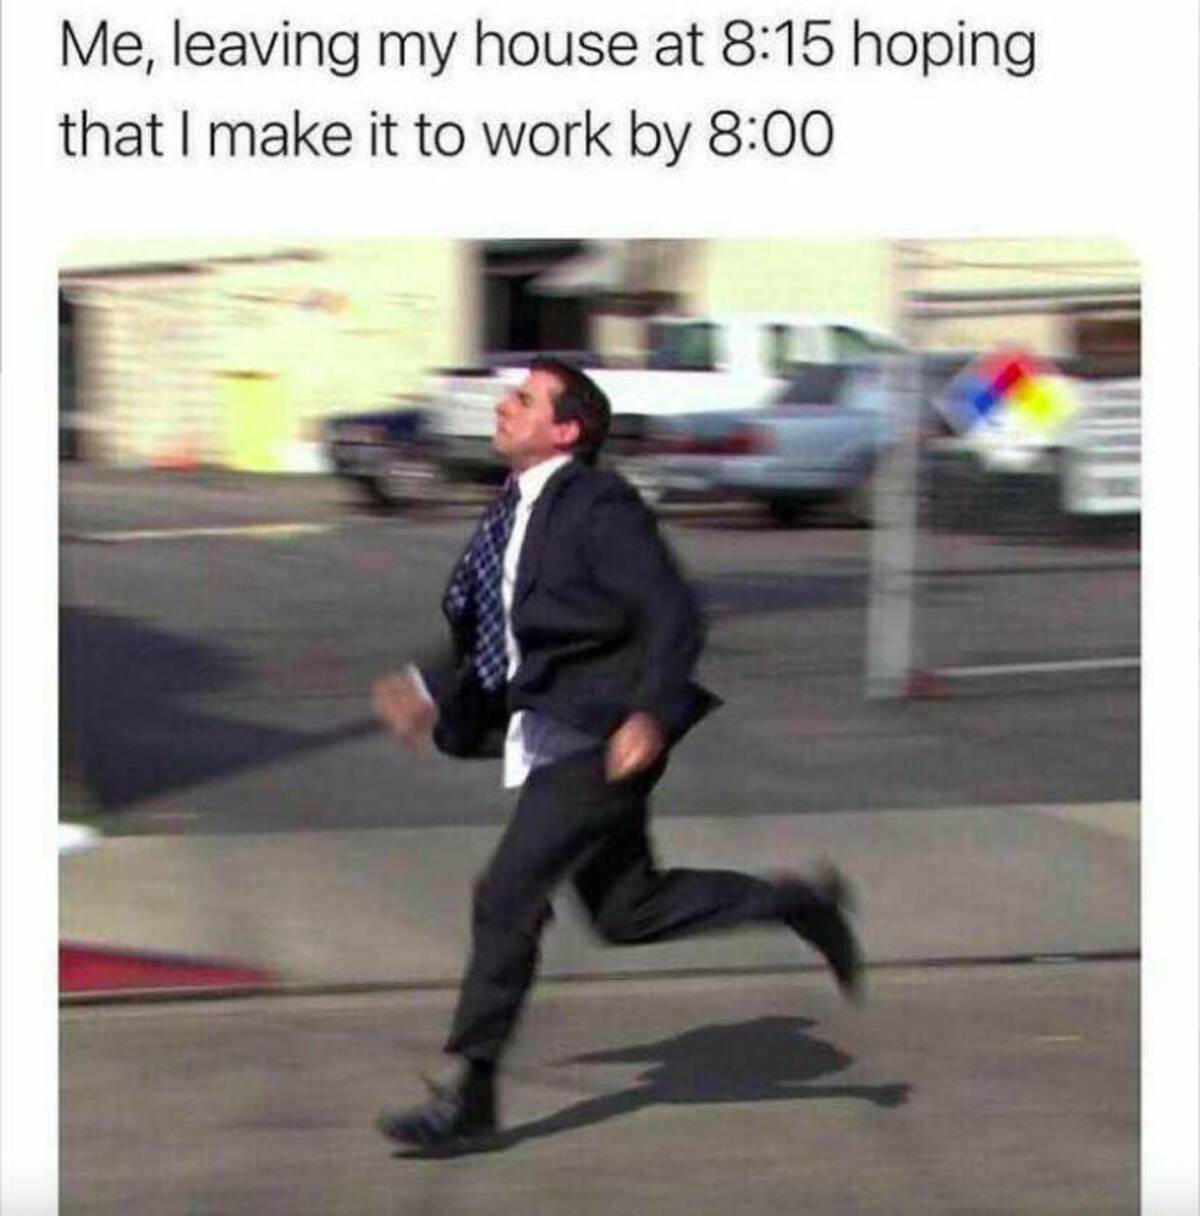 funny memes late for work meme - Me, leaving my house at hoping that I make it to work by